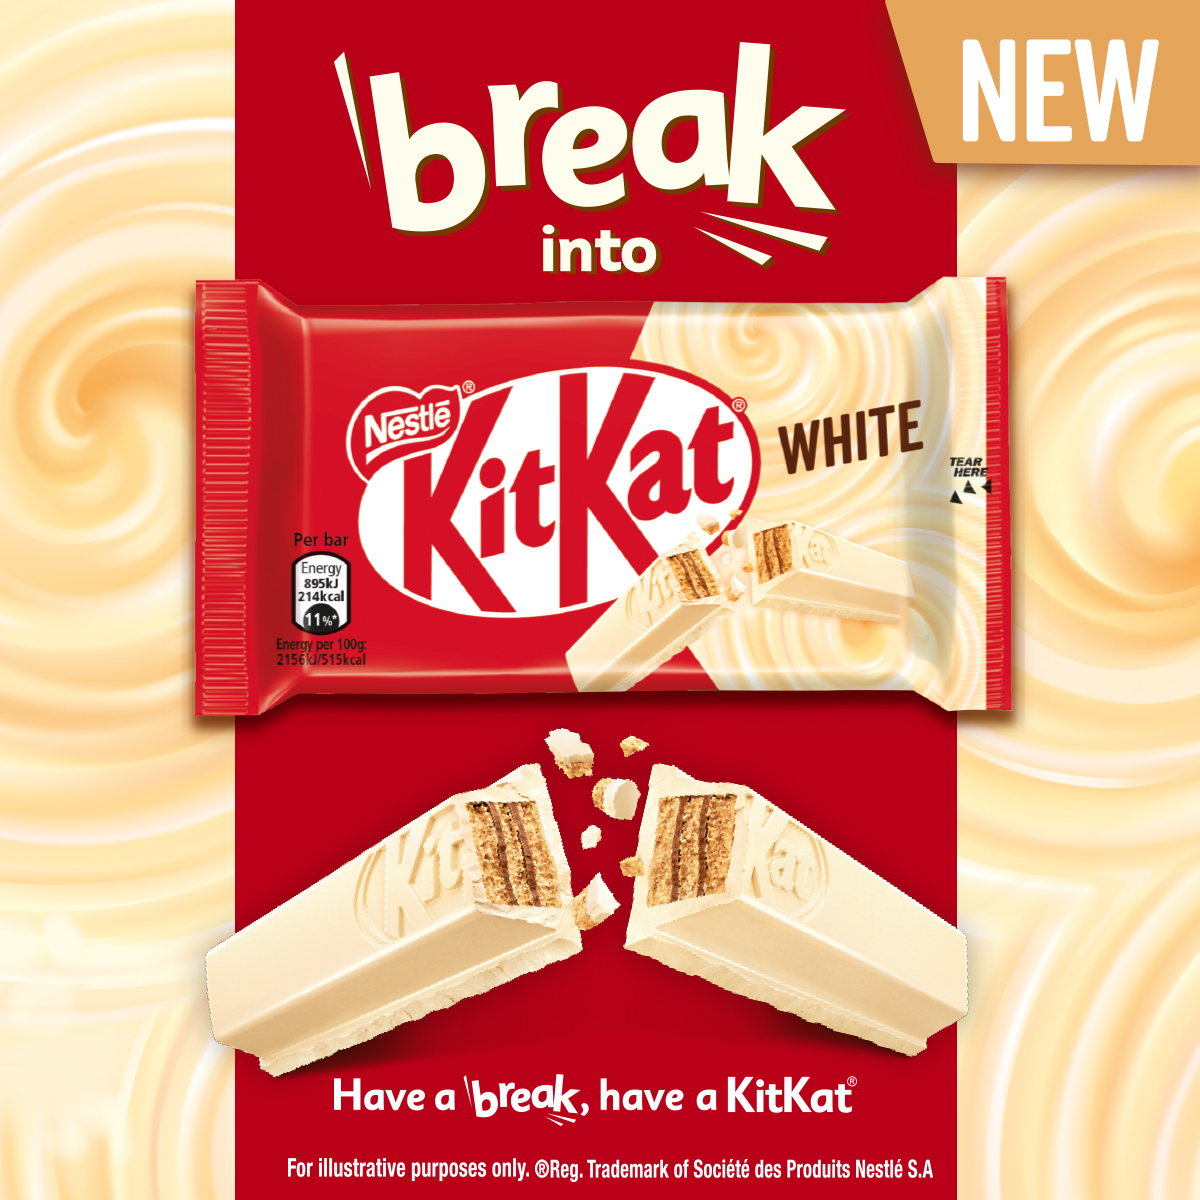 Break into the new KitKat White! Available in stores now! 🍫😍 Find your local store 👉 onestop.co.uk/store-finder/ Subject to availability. Participating stores only. #KitKatBreak